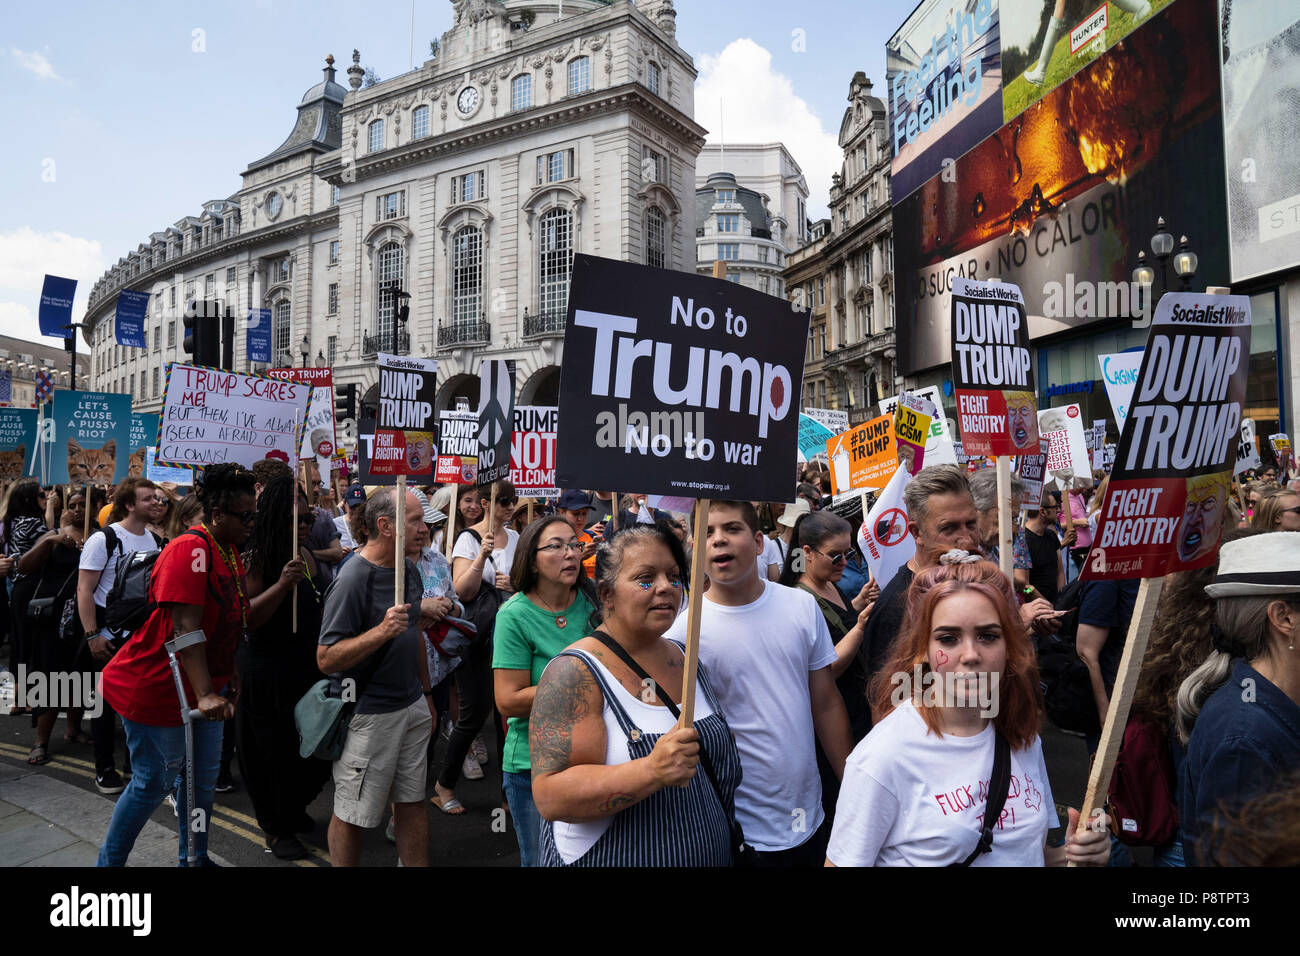 LONDON - JULY 13: A protest march against the visit to the UK by US President, Donald Trump, passes through Central London on July 13, 2018,. Photo by David Levenson Credit: David Levenson/Alamy Live News Credit: David Levenson/Alamy Live News Stock Photo